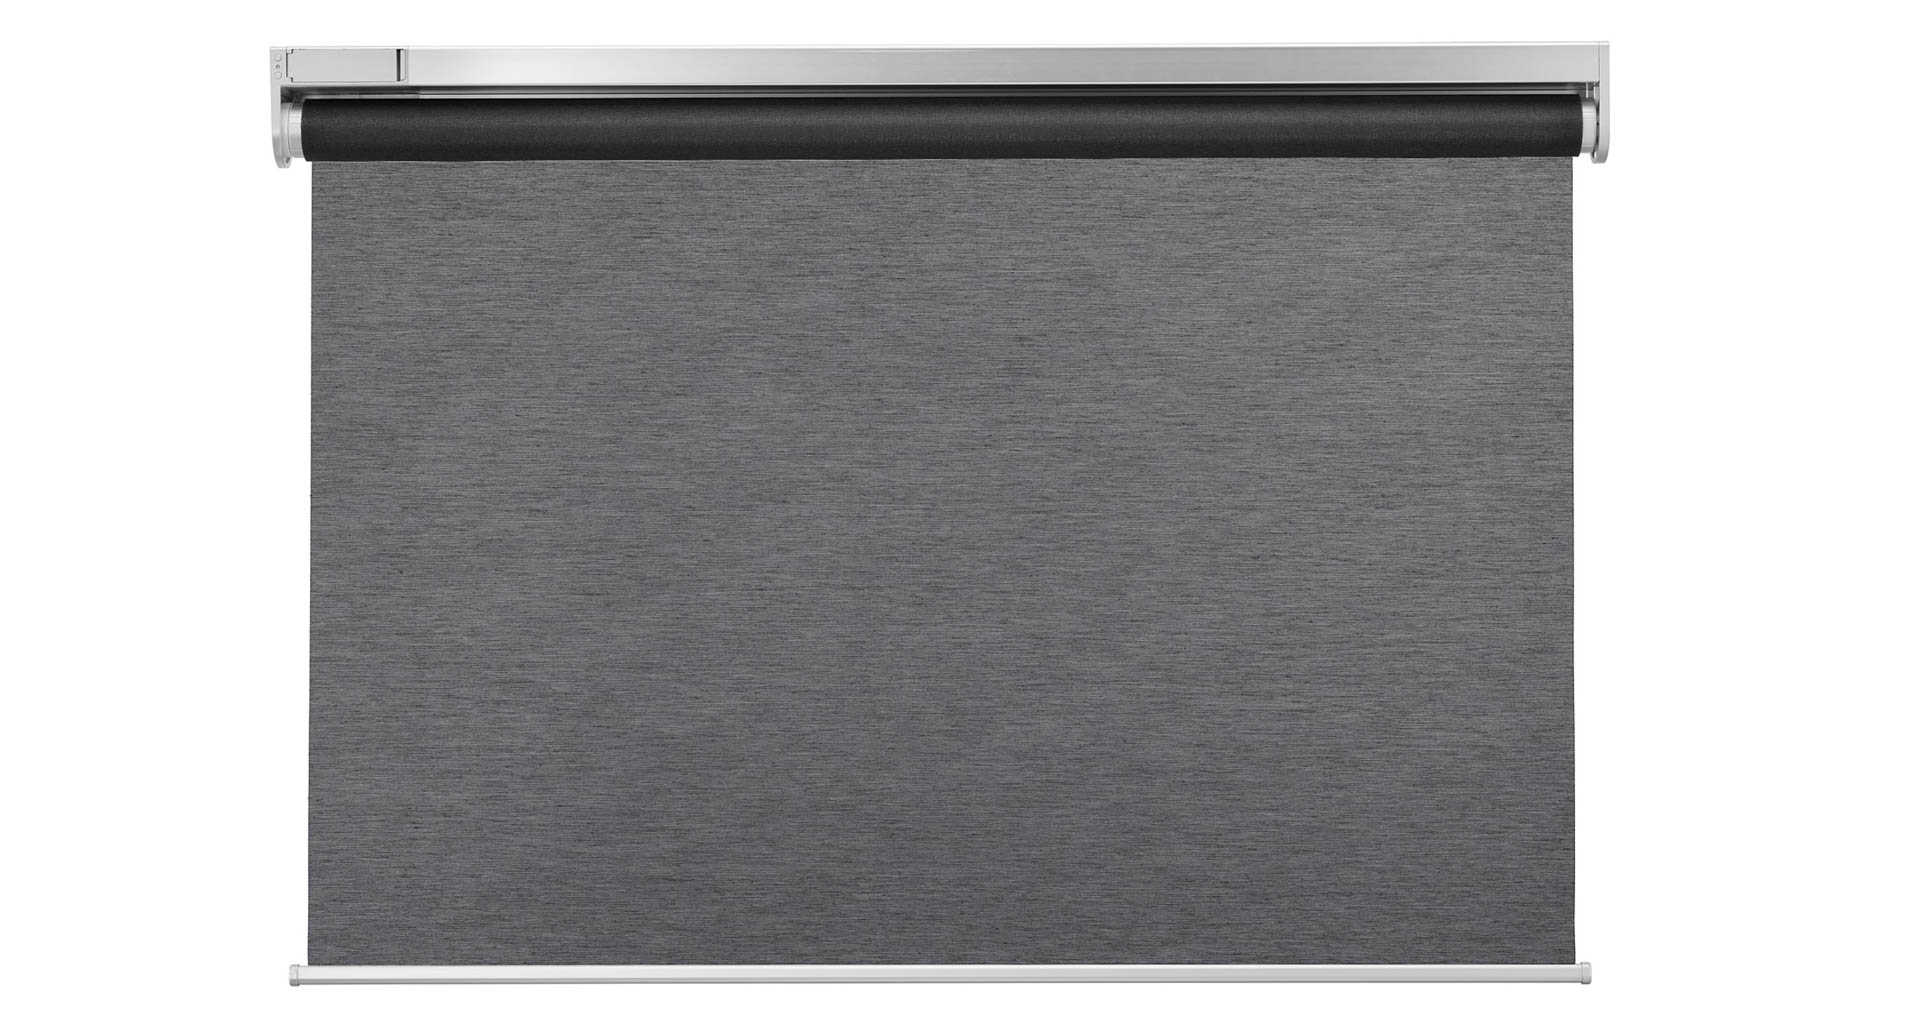 The IKEA Fyrtur smart shades, in a gray blackout fabric design. A rechargeable battery is located behind a tilt-out flap on the left side of the headrail. Image: IKEA